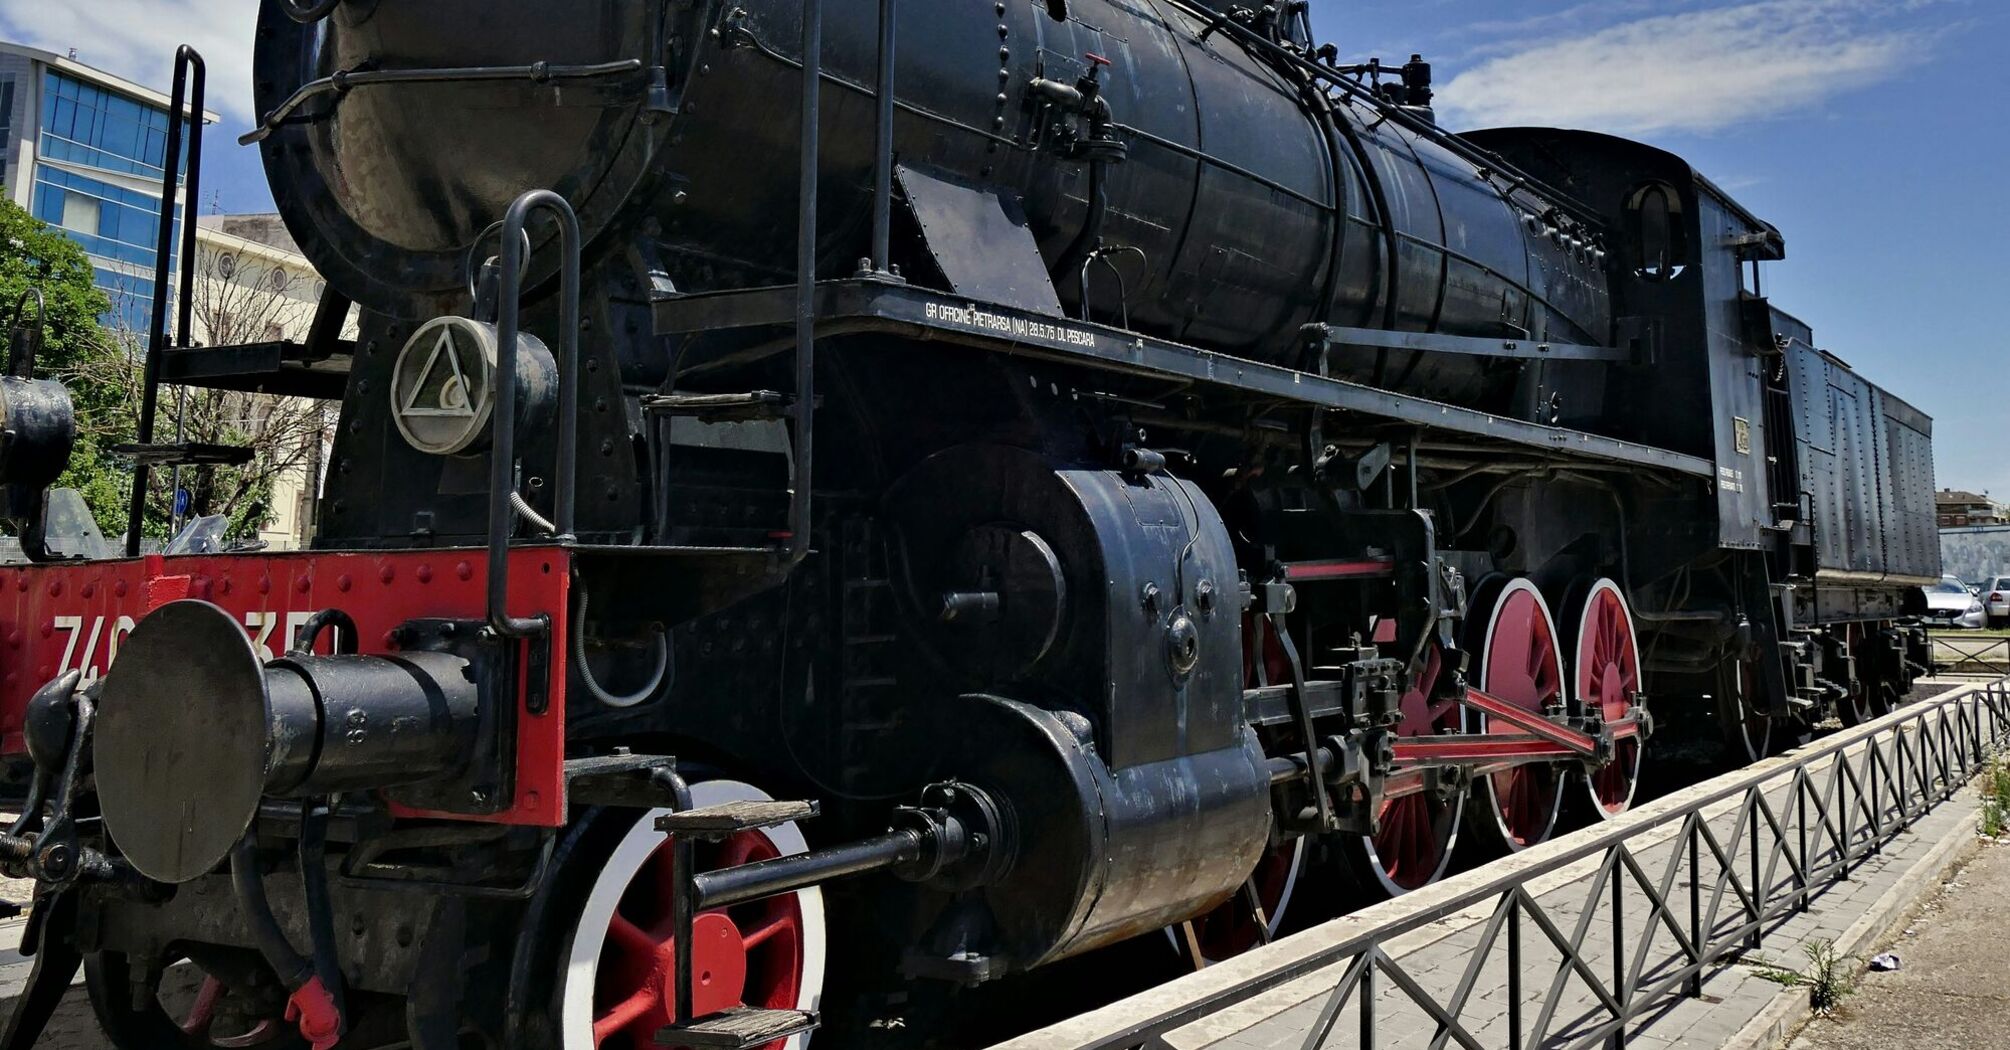 This is a photo of a vintage black steam locomotive with red wheels, displayed outdoors under a clear sky